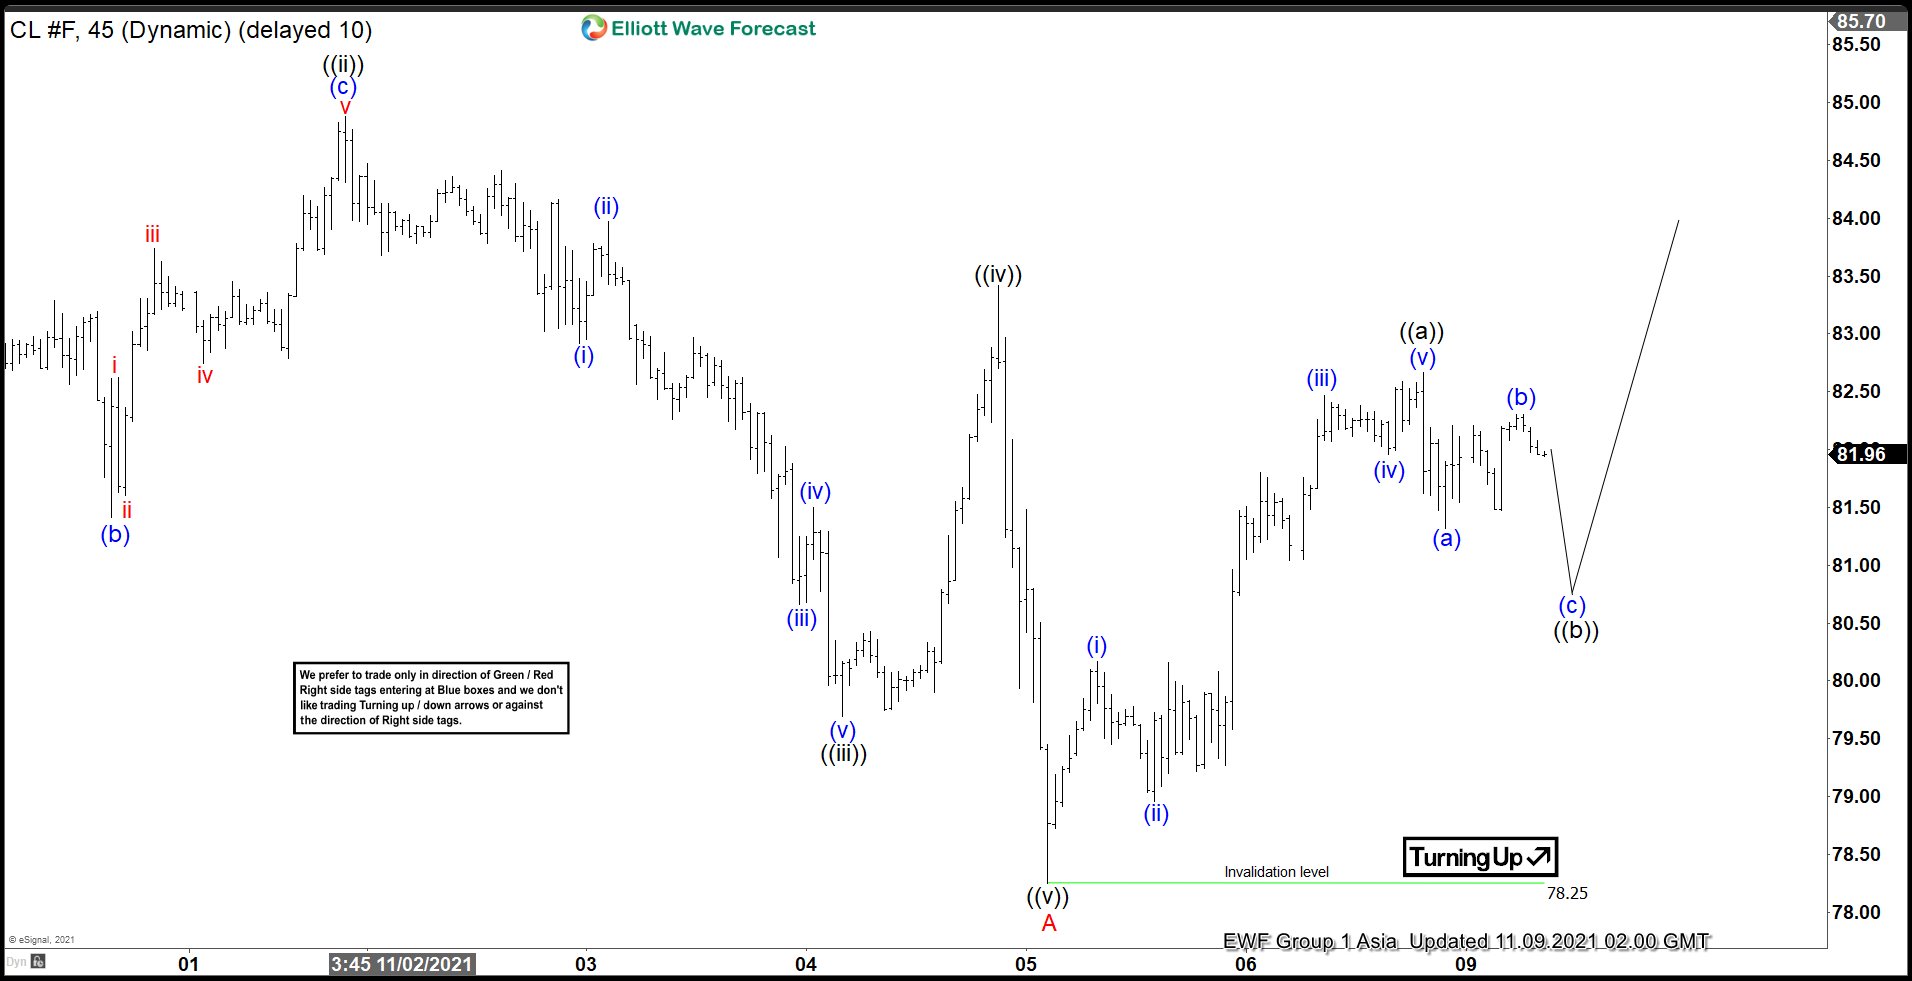 Elliott Wave View: Oil (CL) Looking for 3 Waves Rally